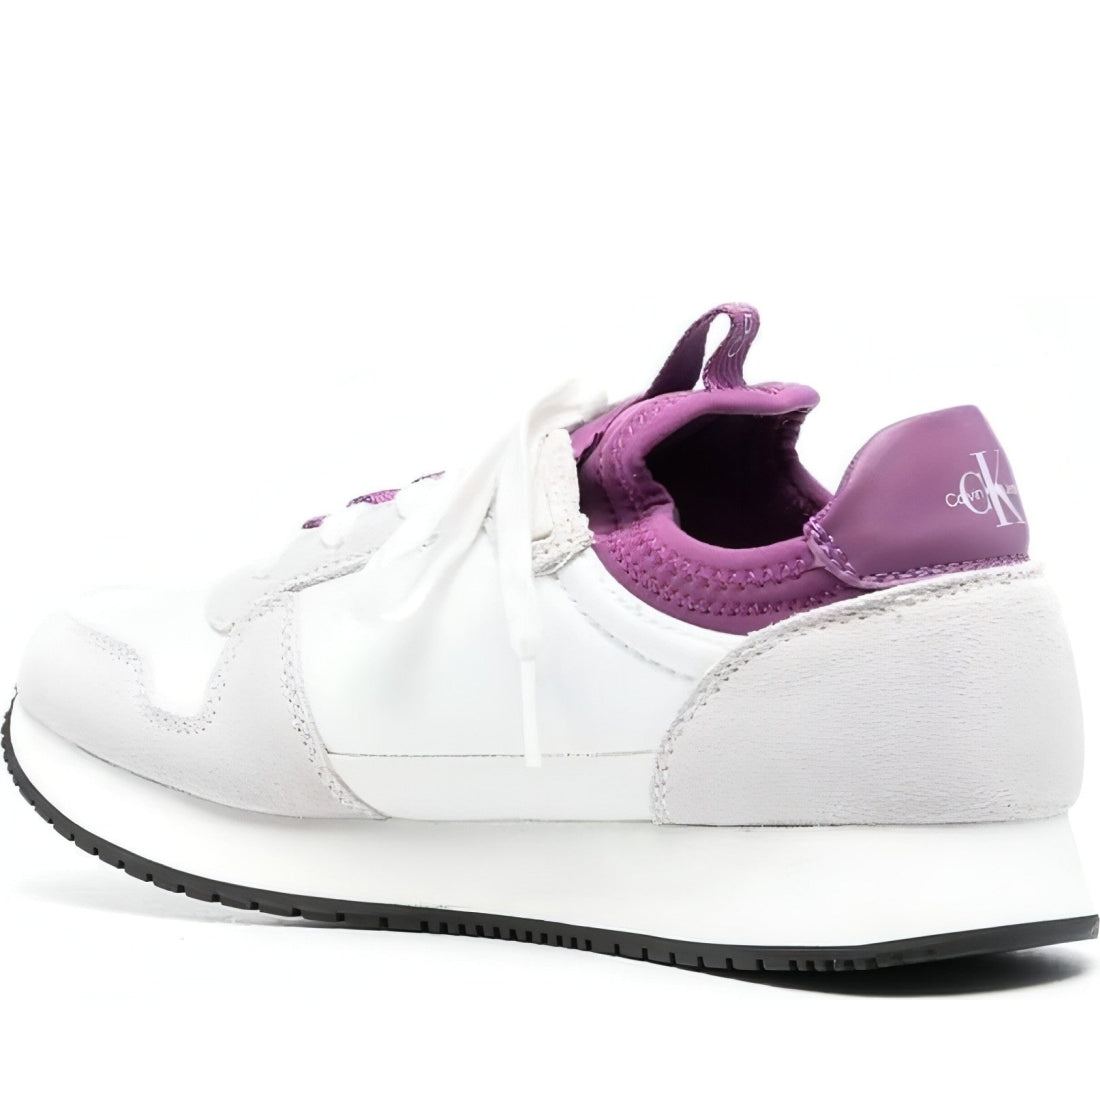 CALVIN KLEIN JEANS womens white, grey, amethyst solaceup ny-lth w trainers | Vilbury London